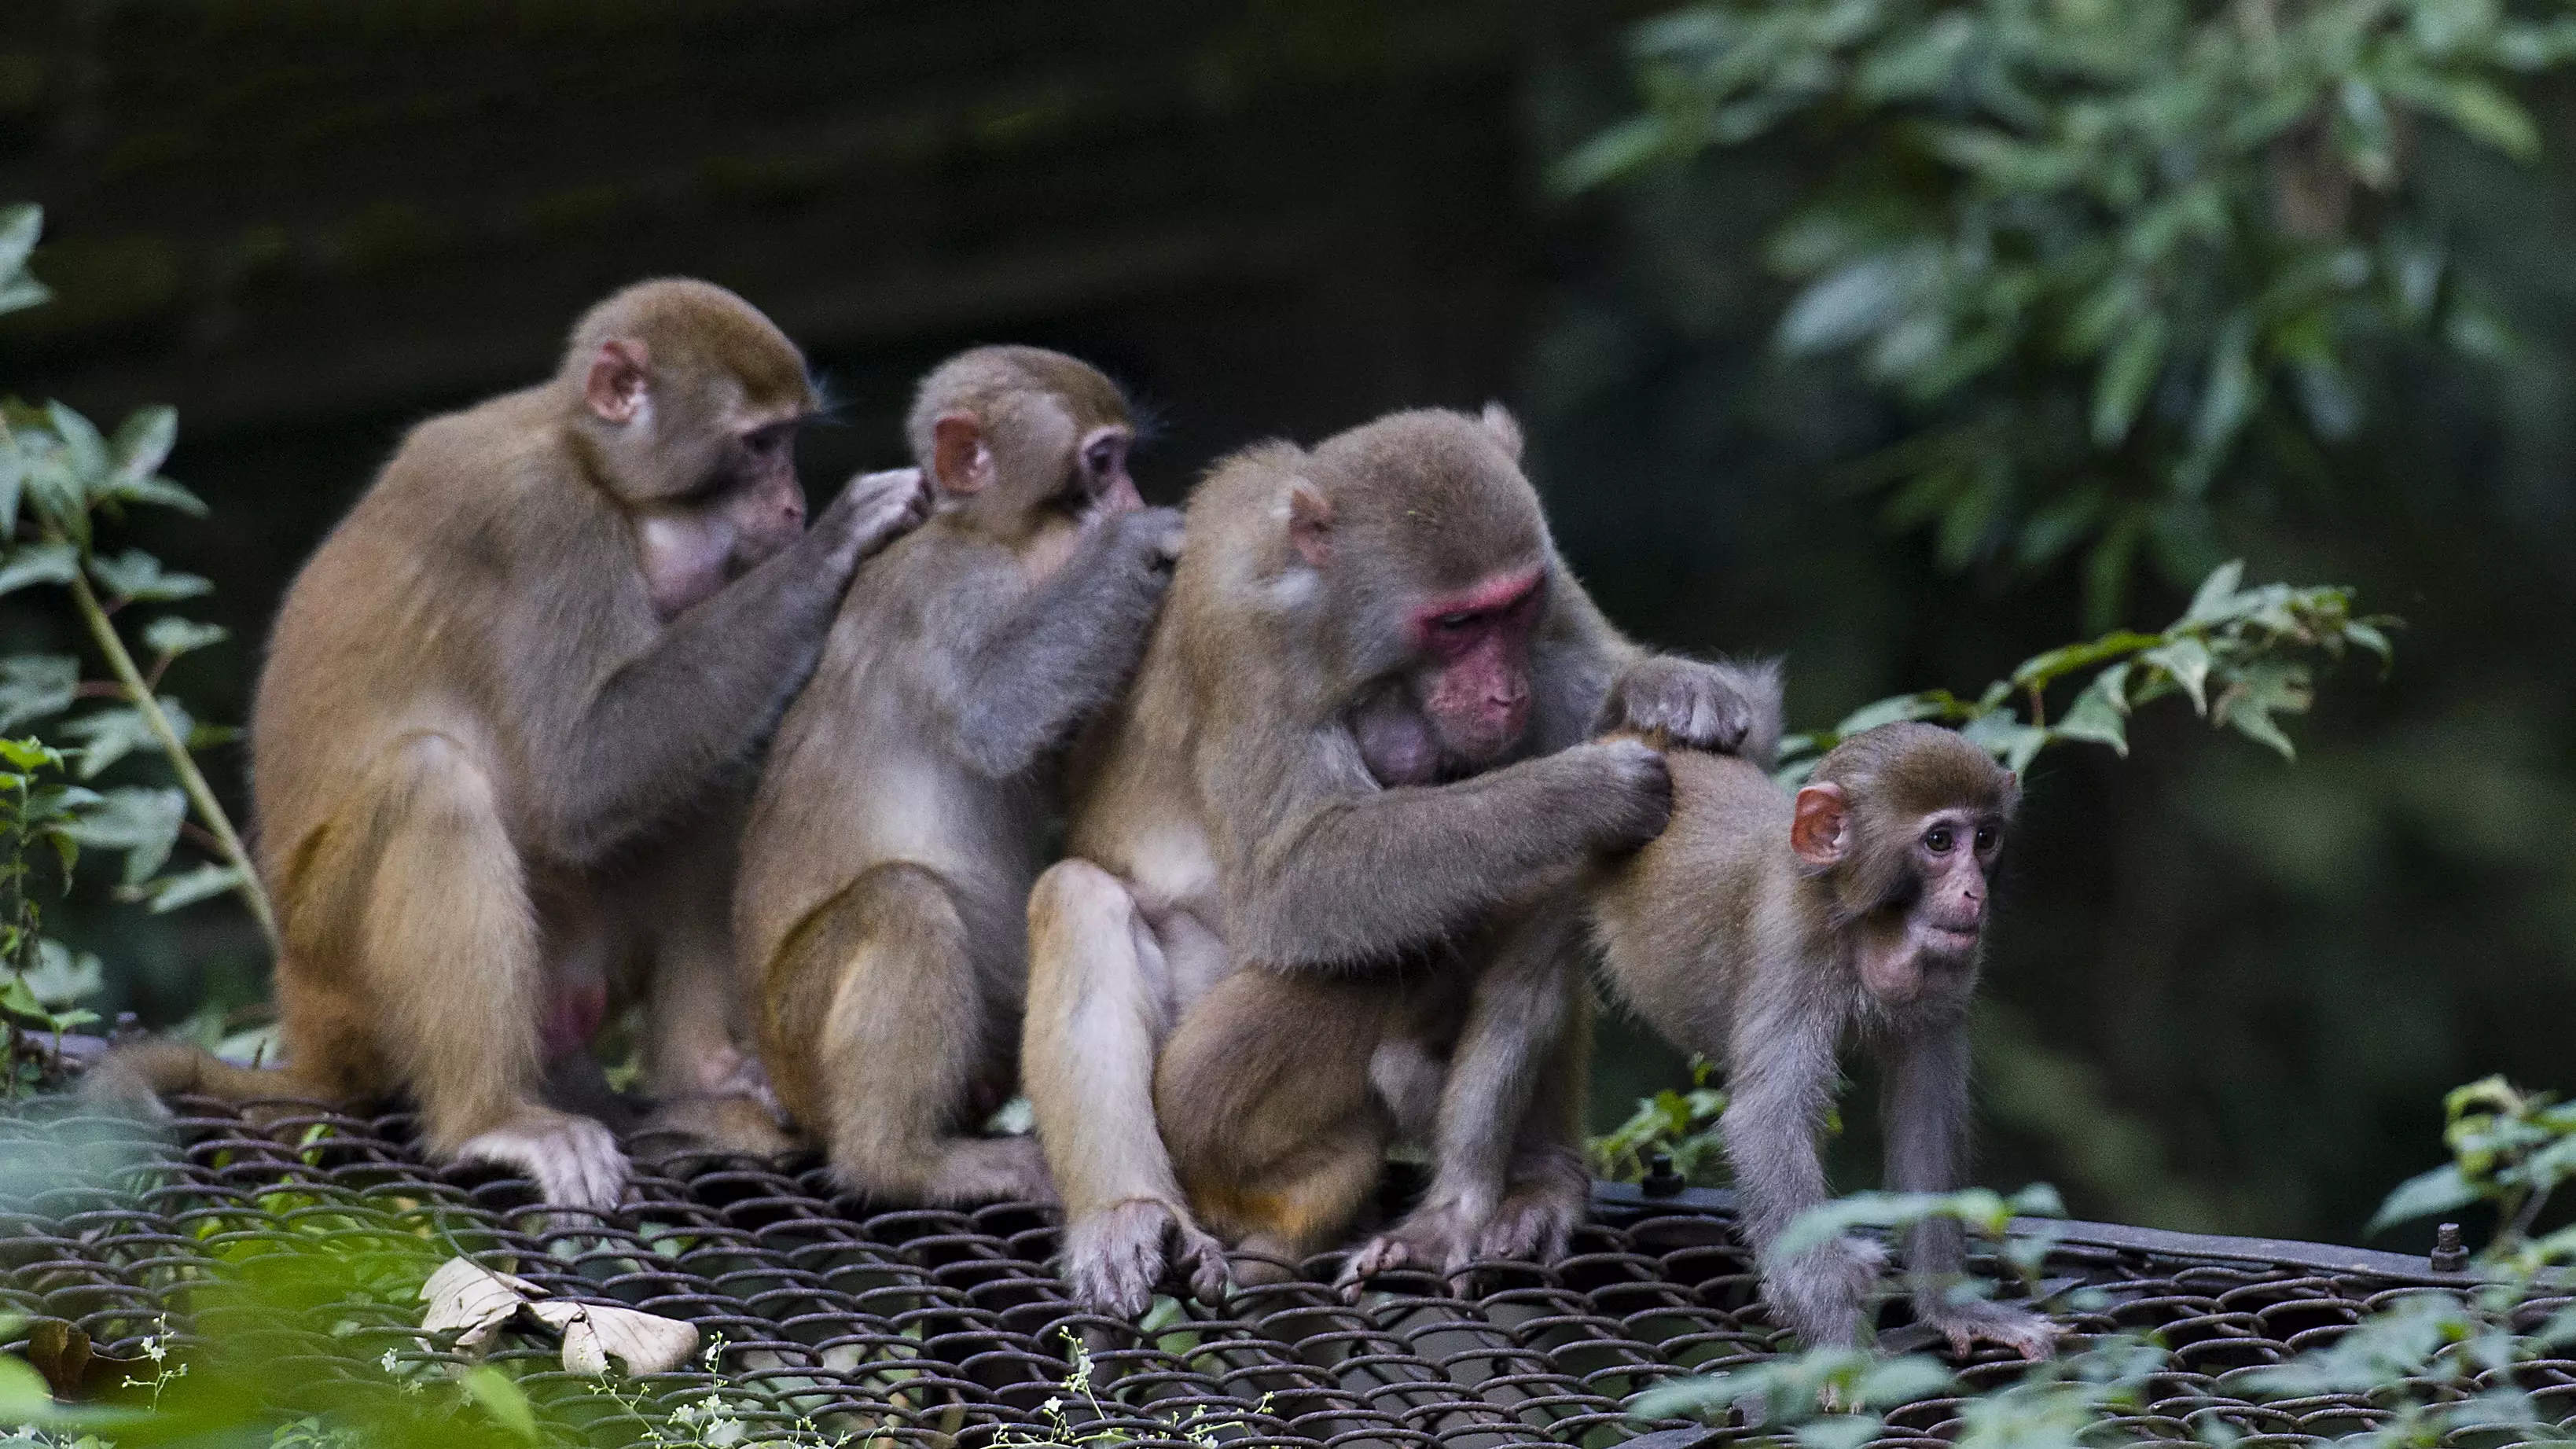 Florida State Park Infested With Monkeys That Carry Sexually Transmitted Infections